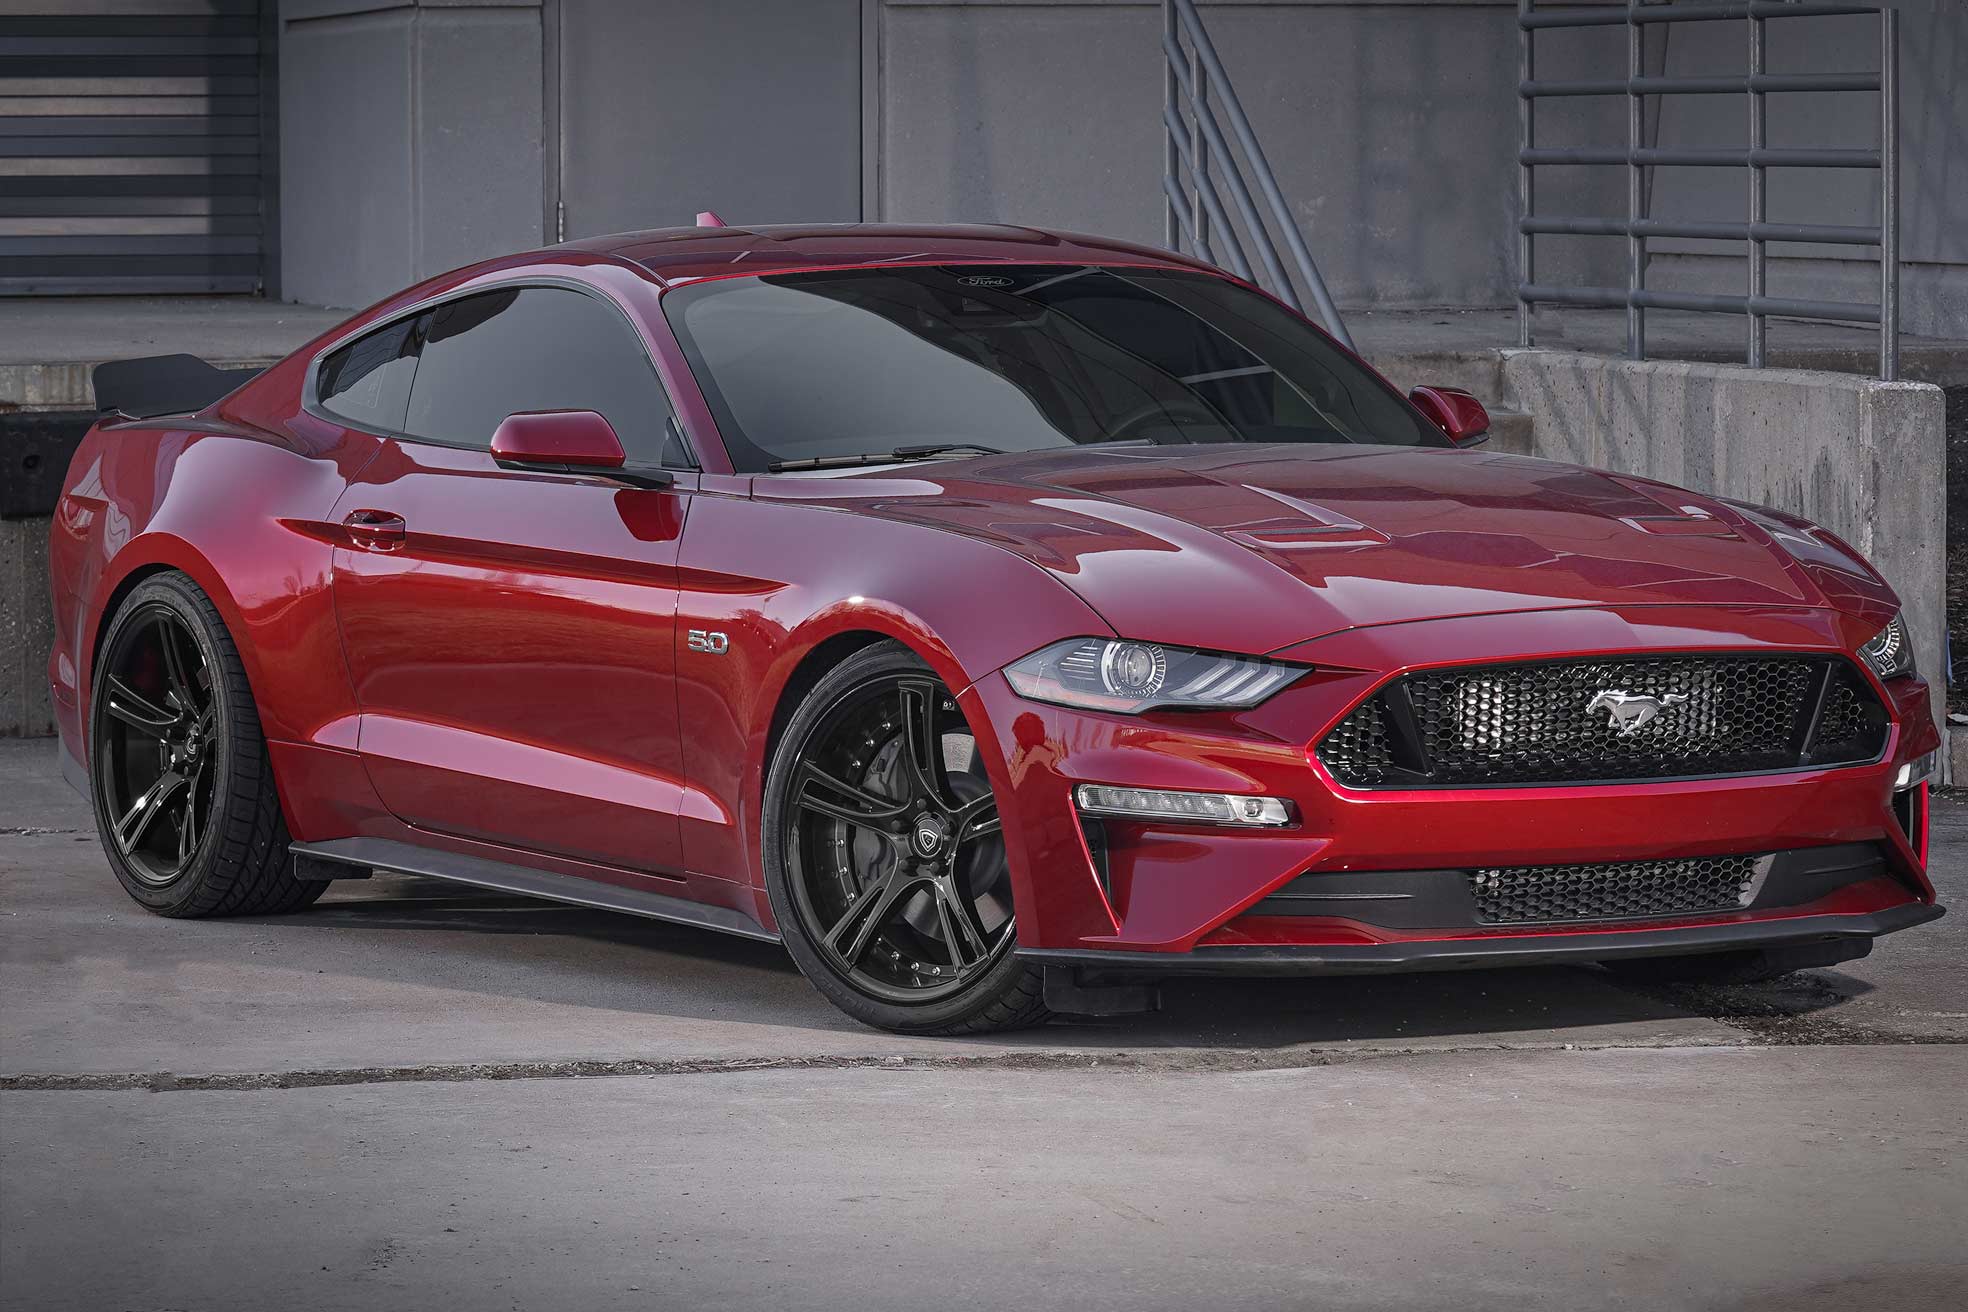 Supercharger kits for 2021 Mustangs: Now Shipping from ProCharger!